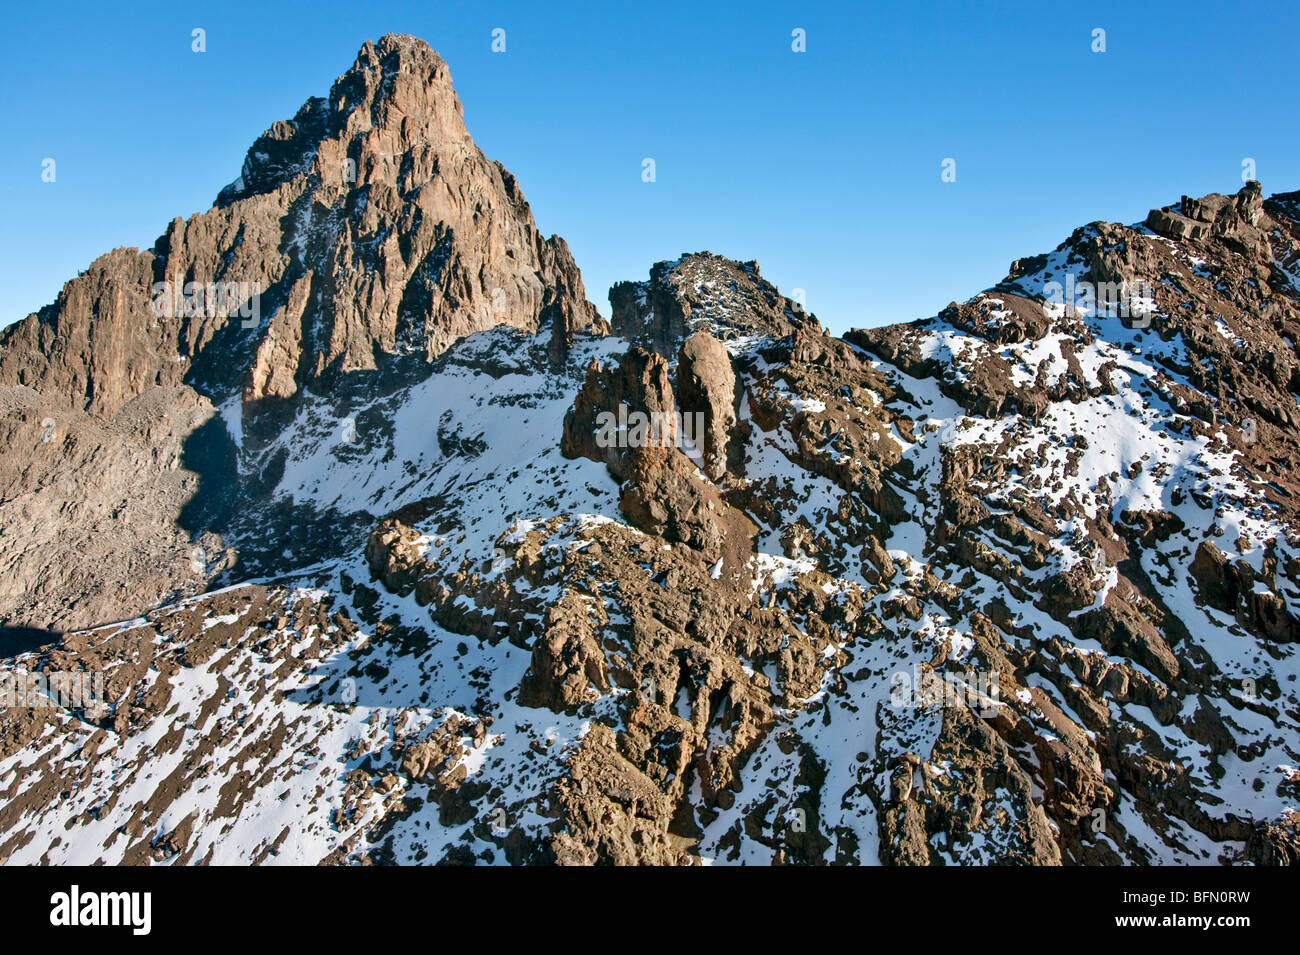 Kenya. The snow-dusted peaks of Mount Kenya, Africa  s second highest mountain. Stock Photo